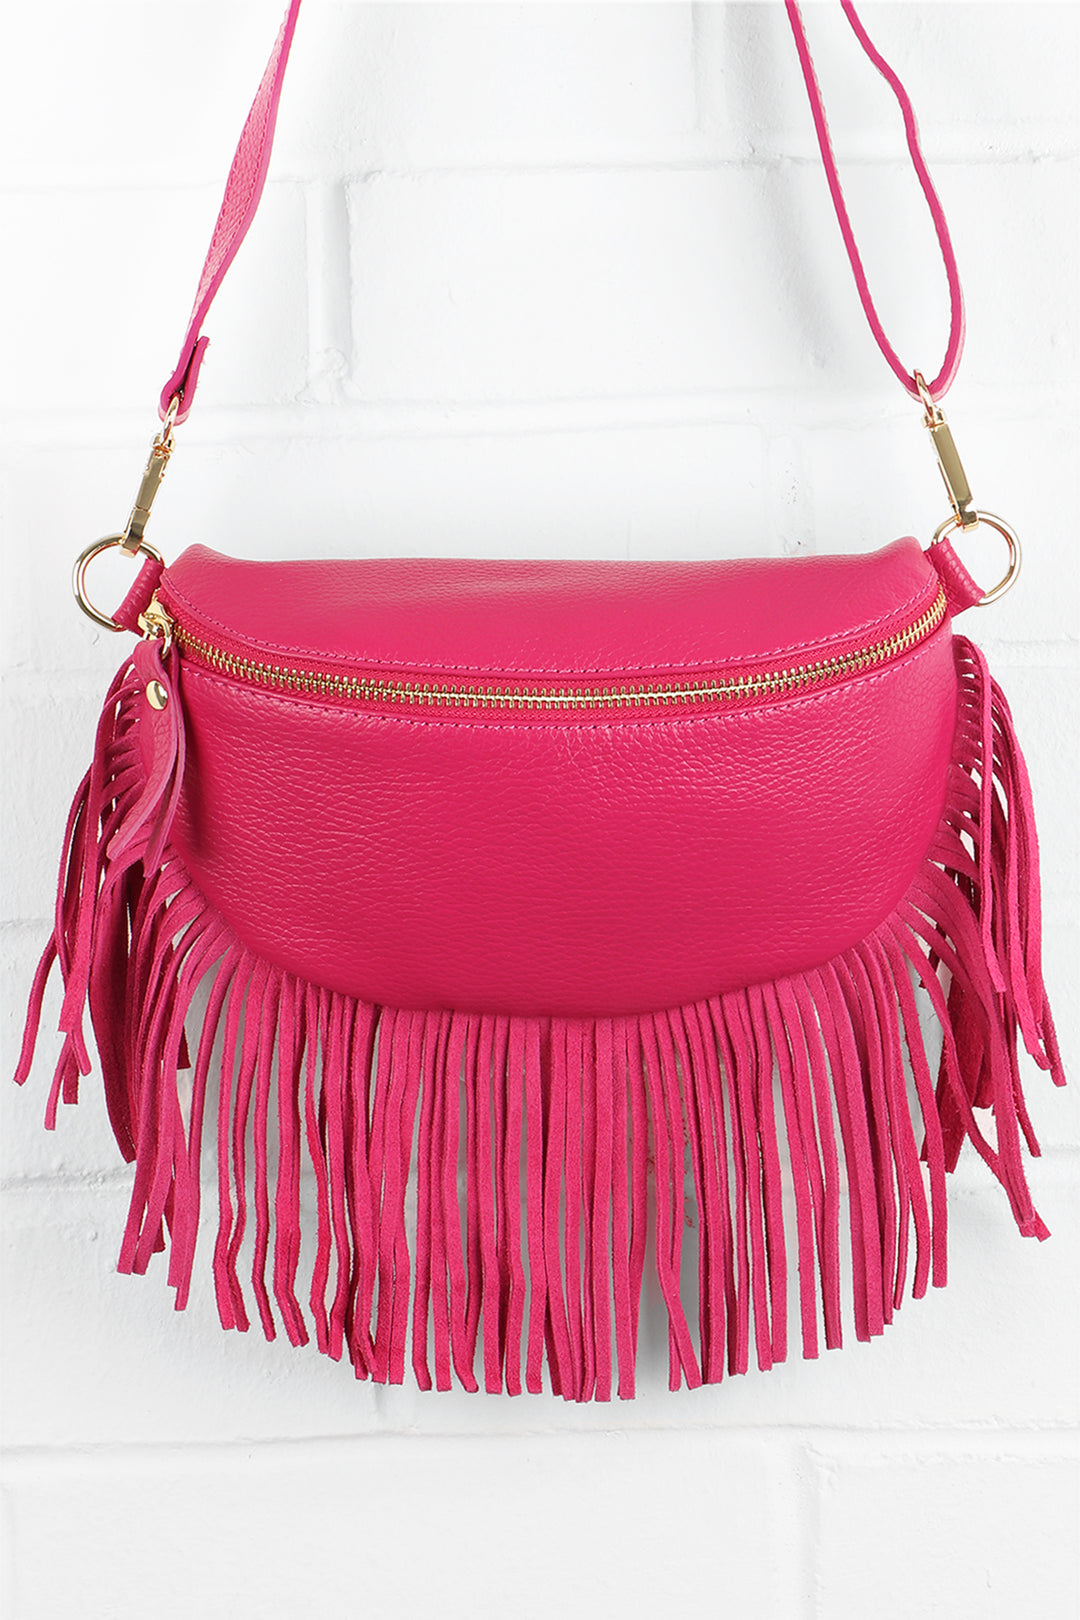 fuchsia pink leather halfmoon bag with fringed trim and zip closure